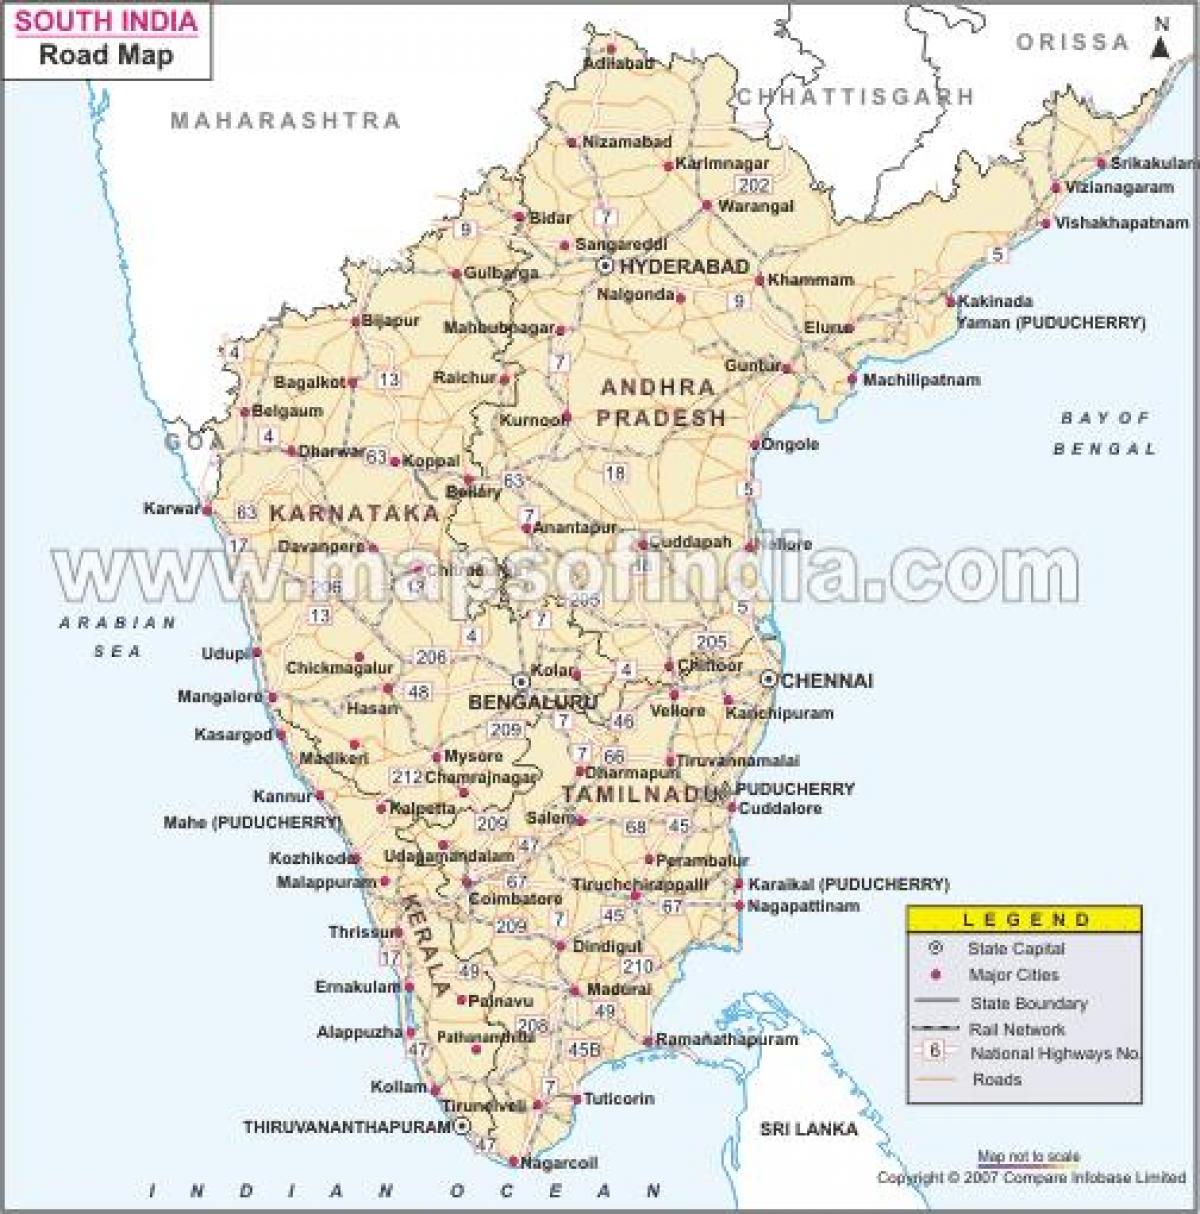 South Indian Road Map 